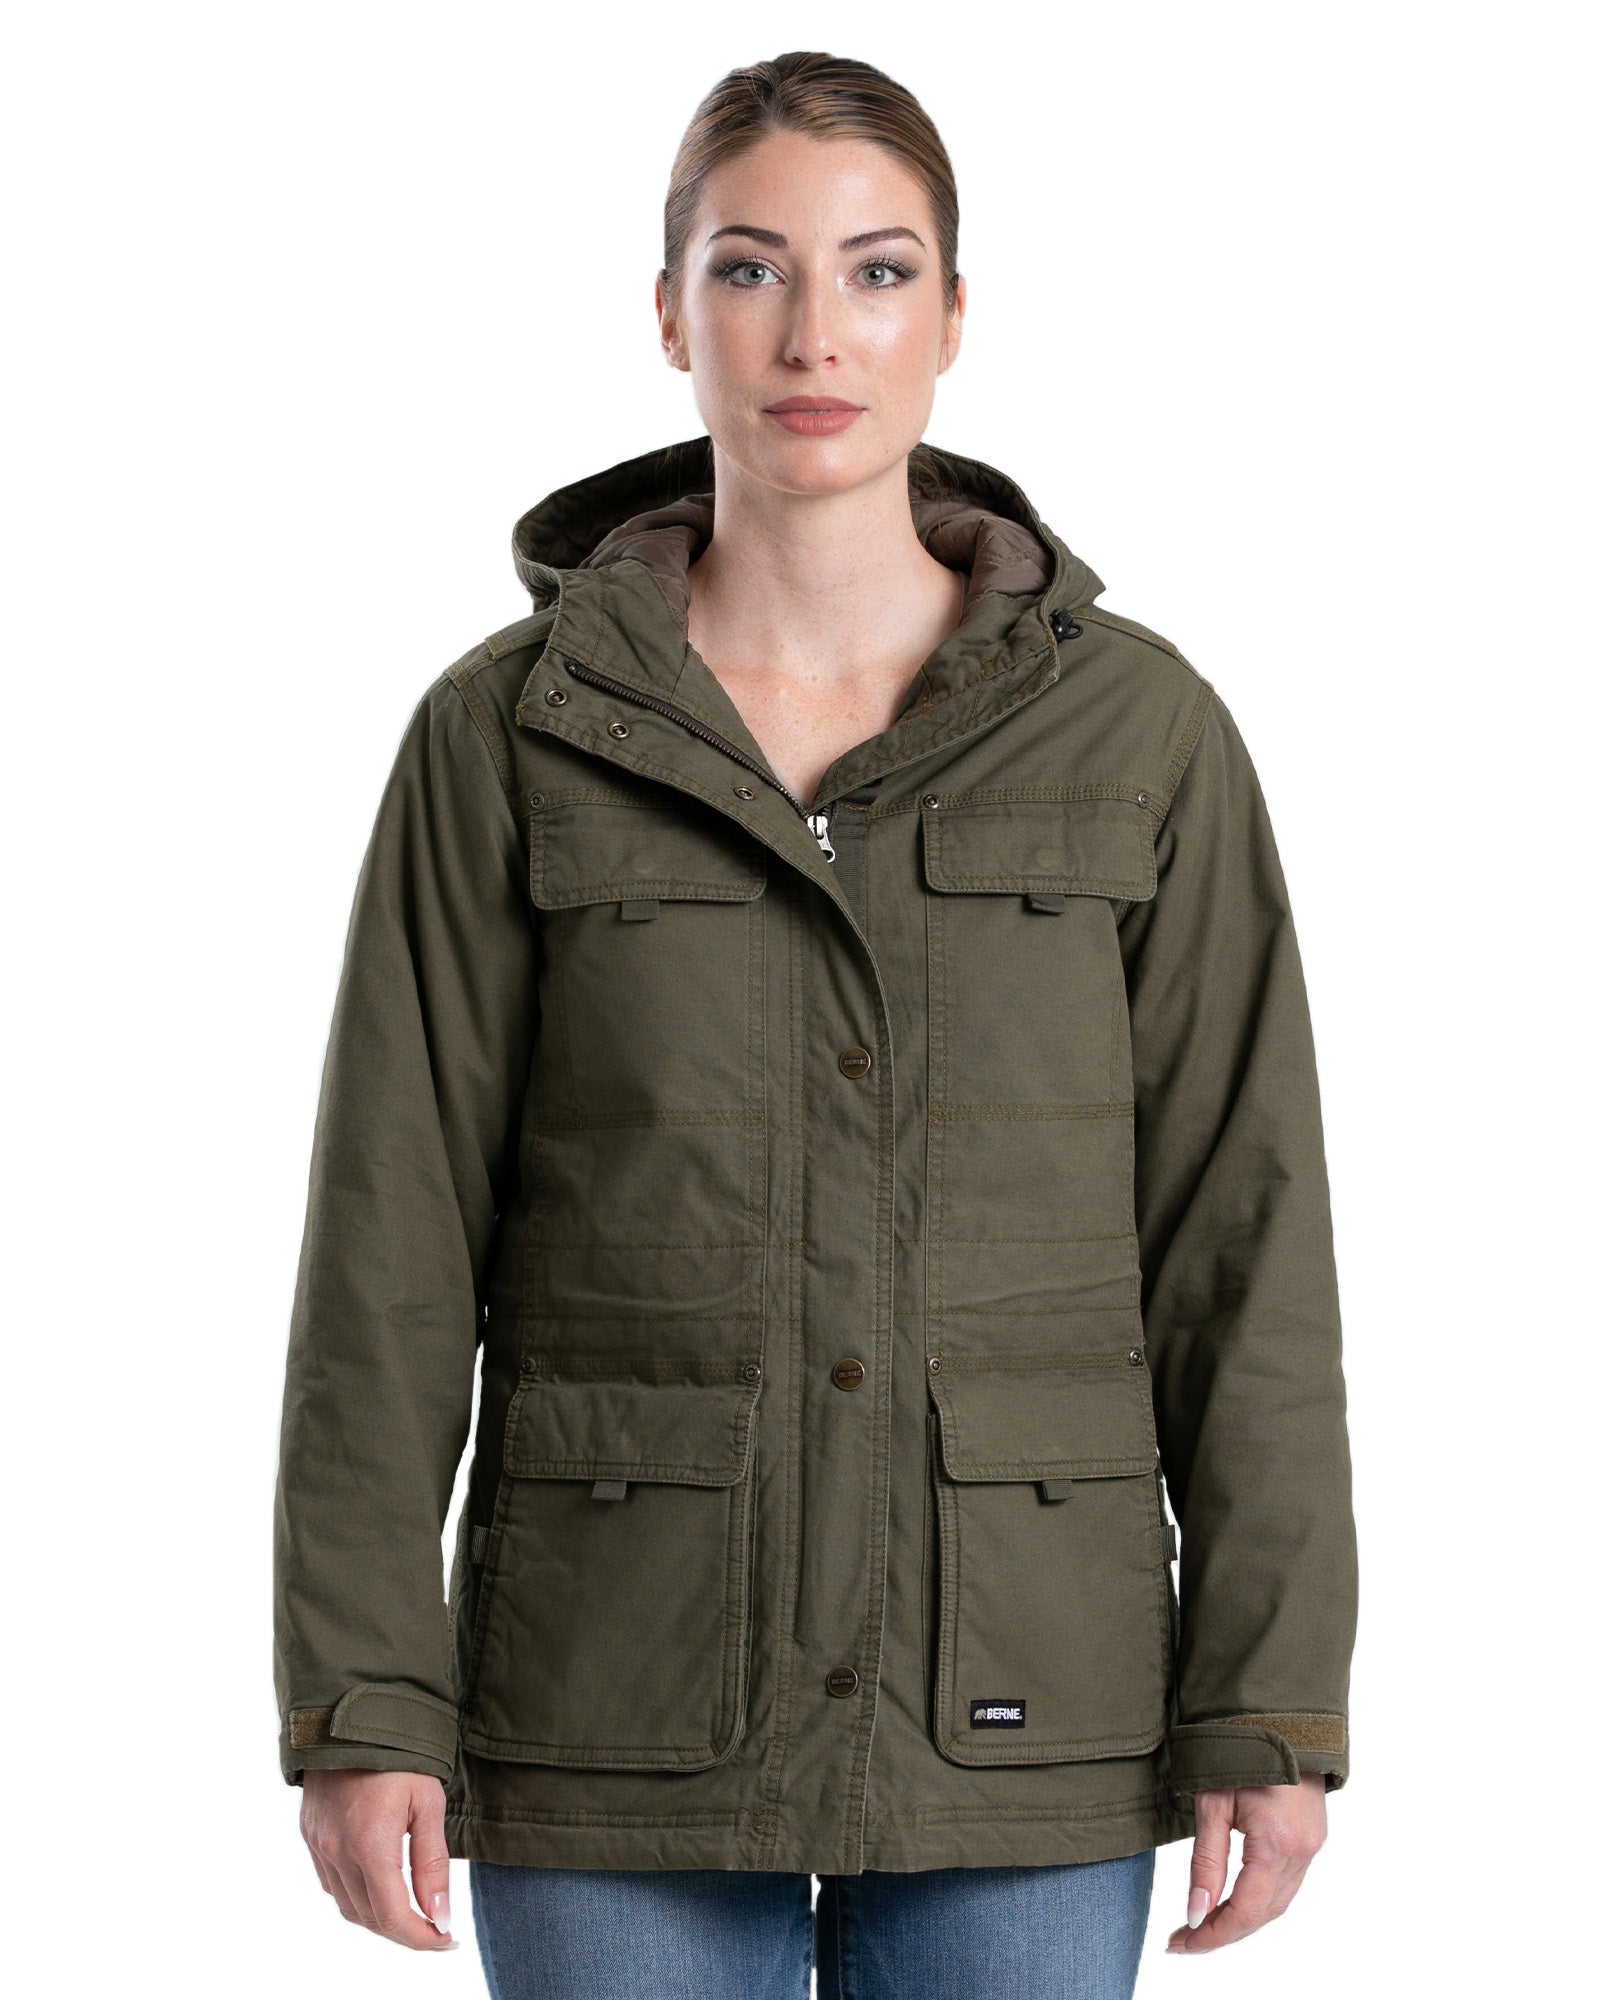 WCH68CDG Women's Softstone Washed Duck Utility Coat